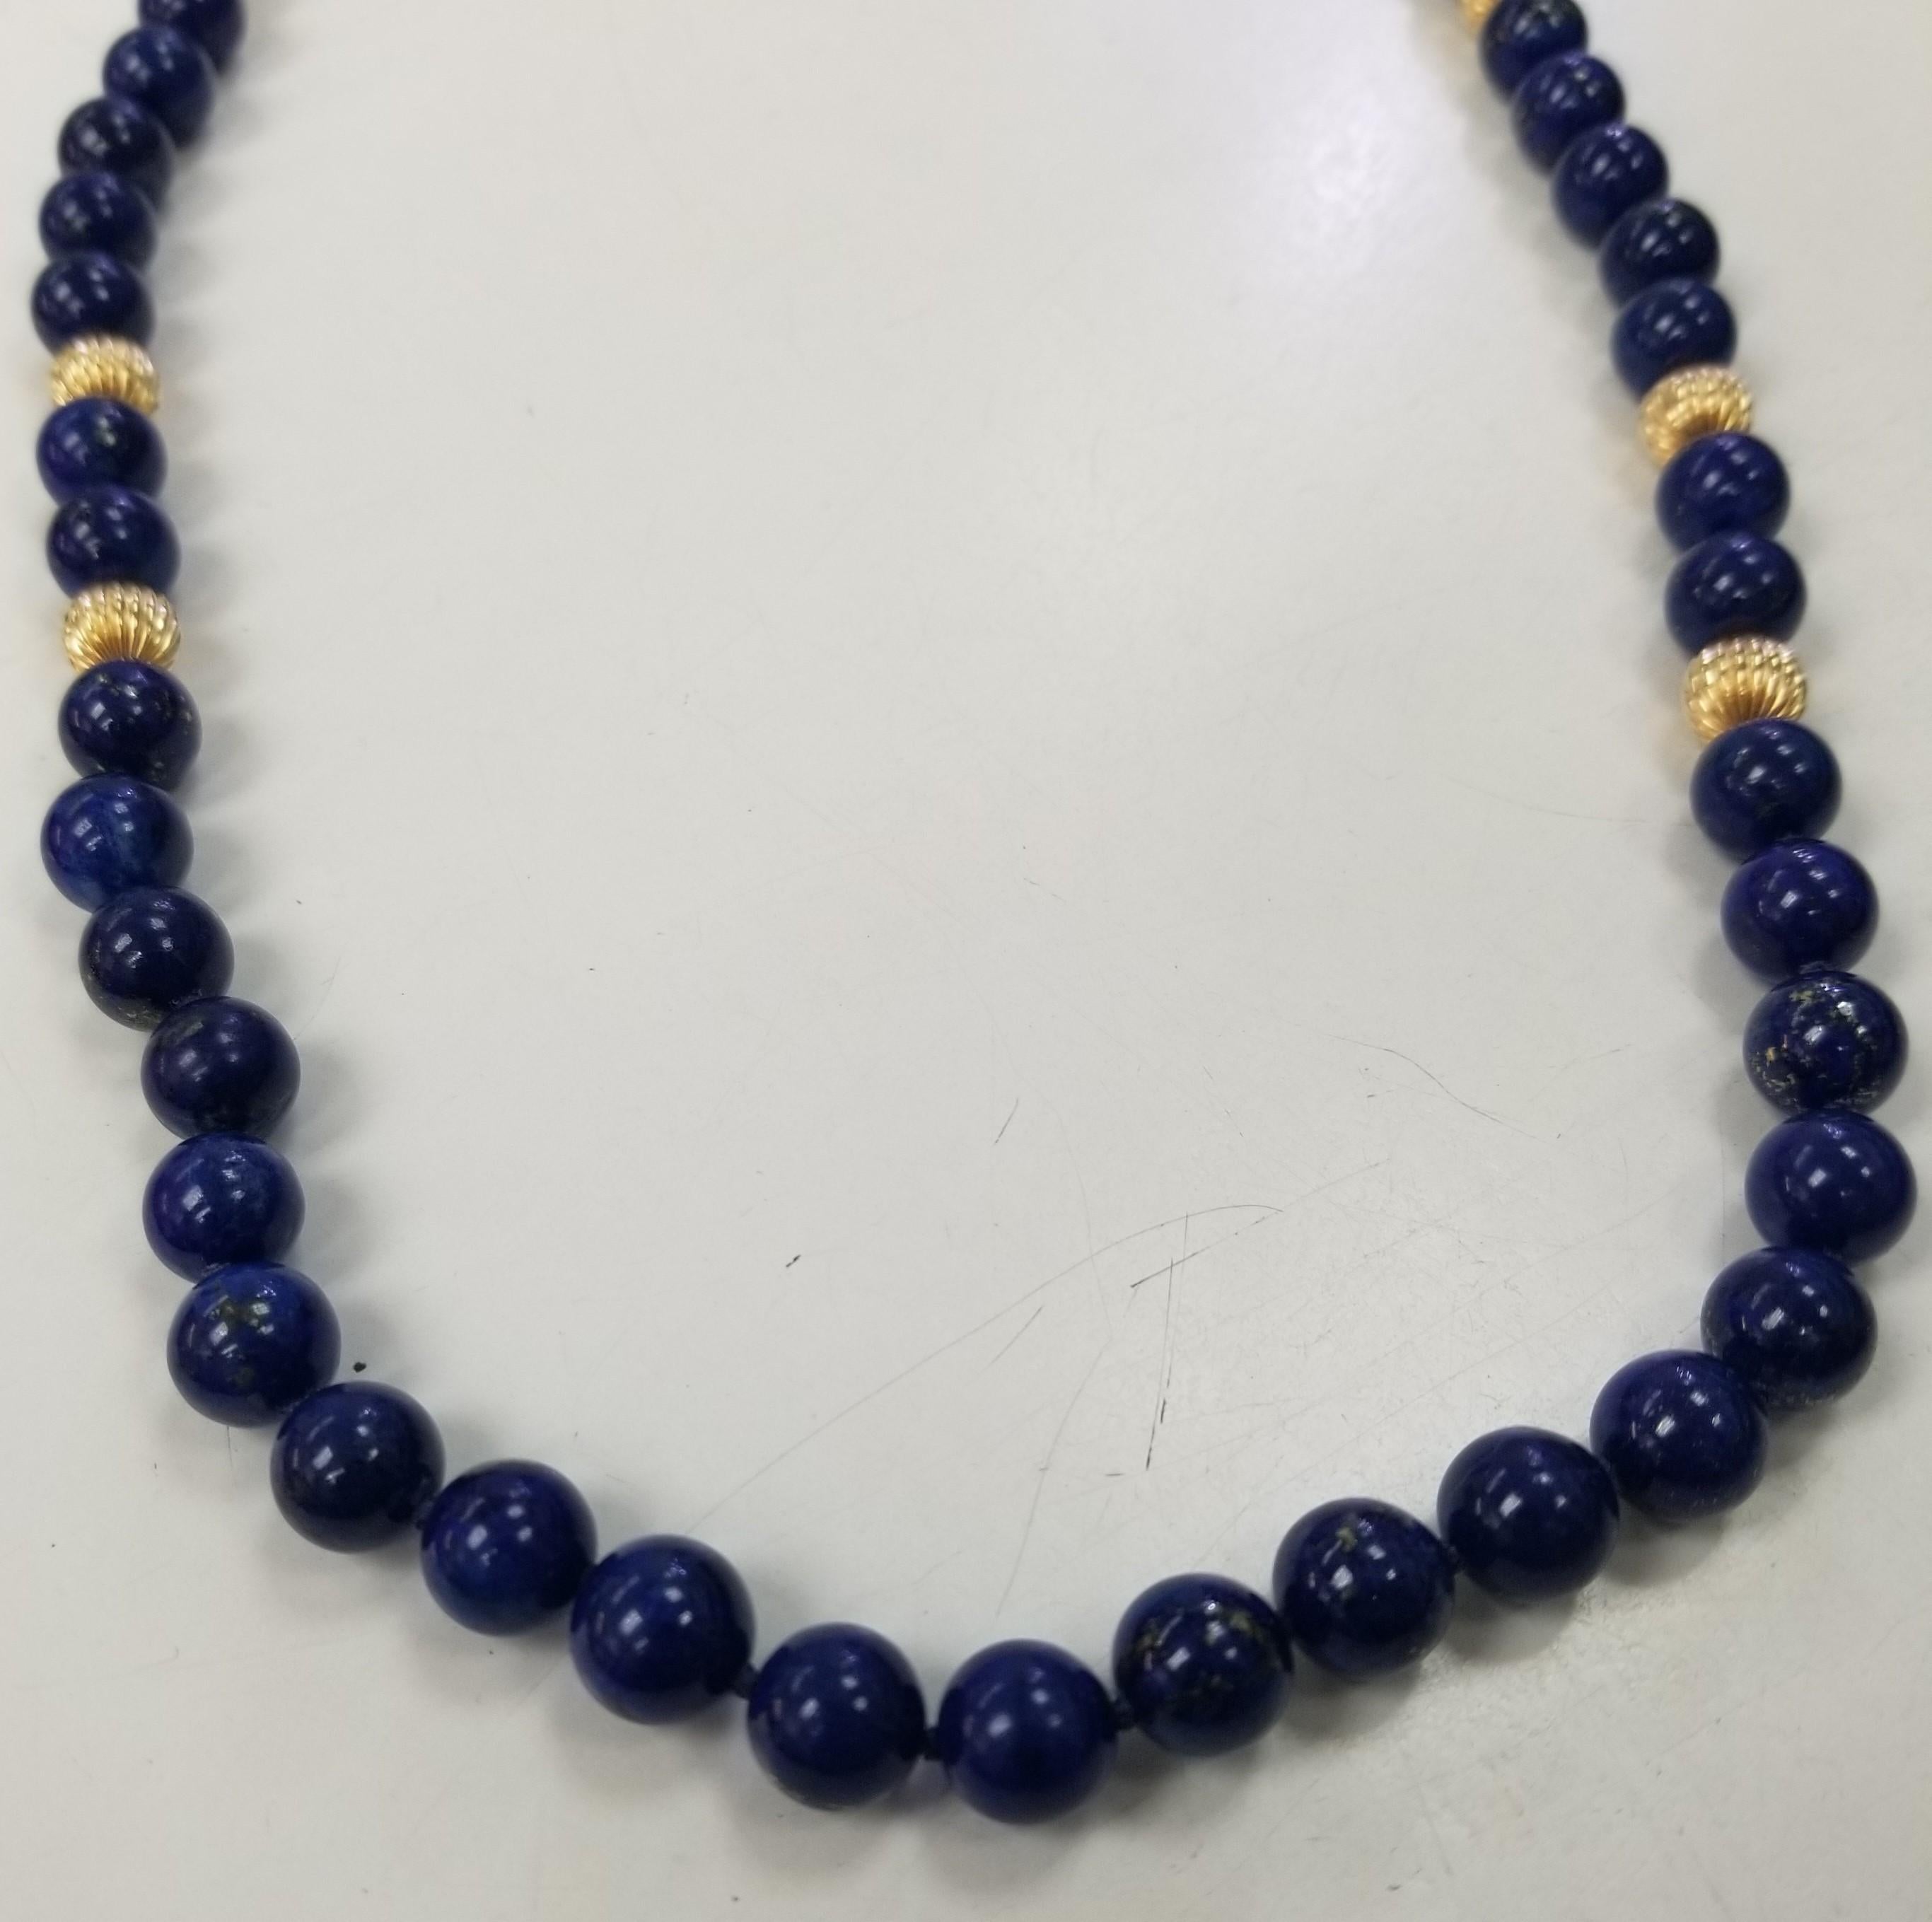 Contemporary Lapis Lazuli 9.5 - 10mm Beads with 14k yellow gold Rondelle Necklace 36 inches For Sale